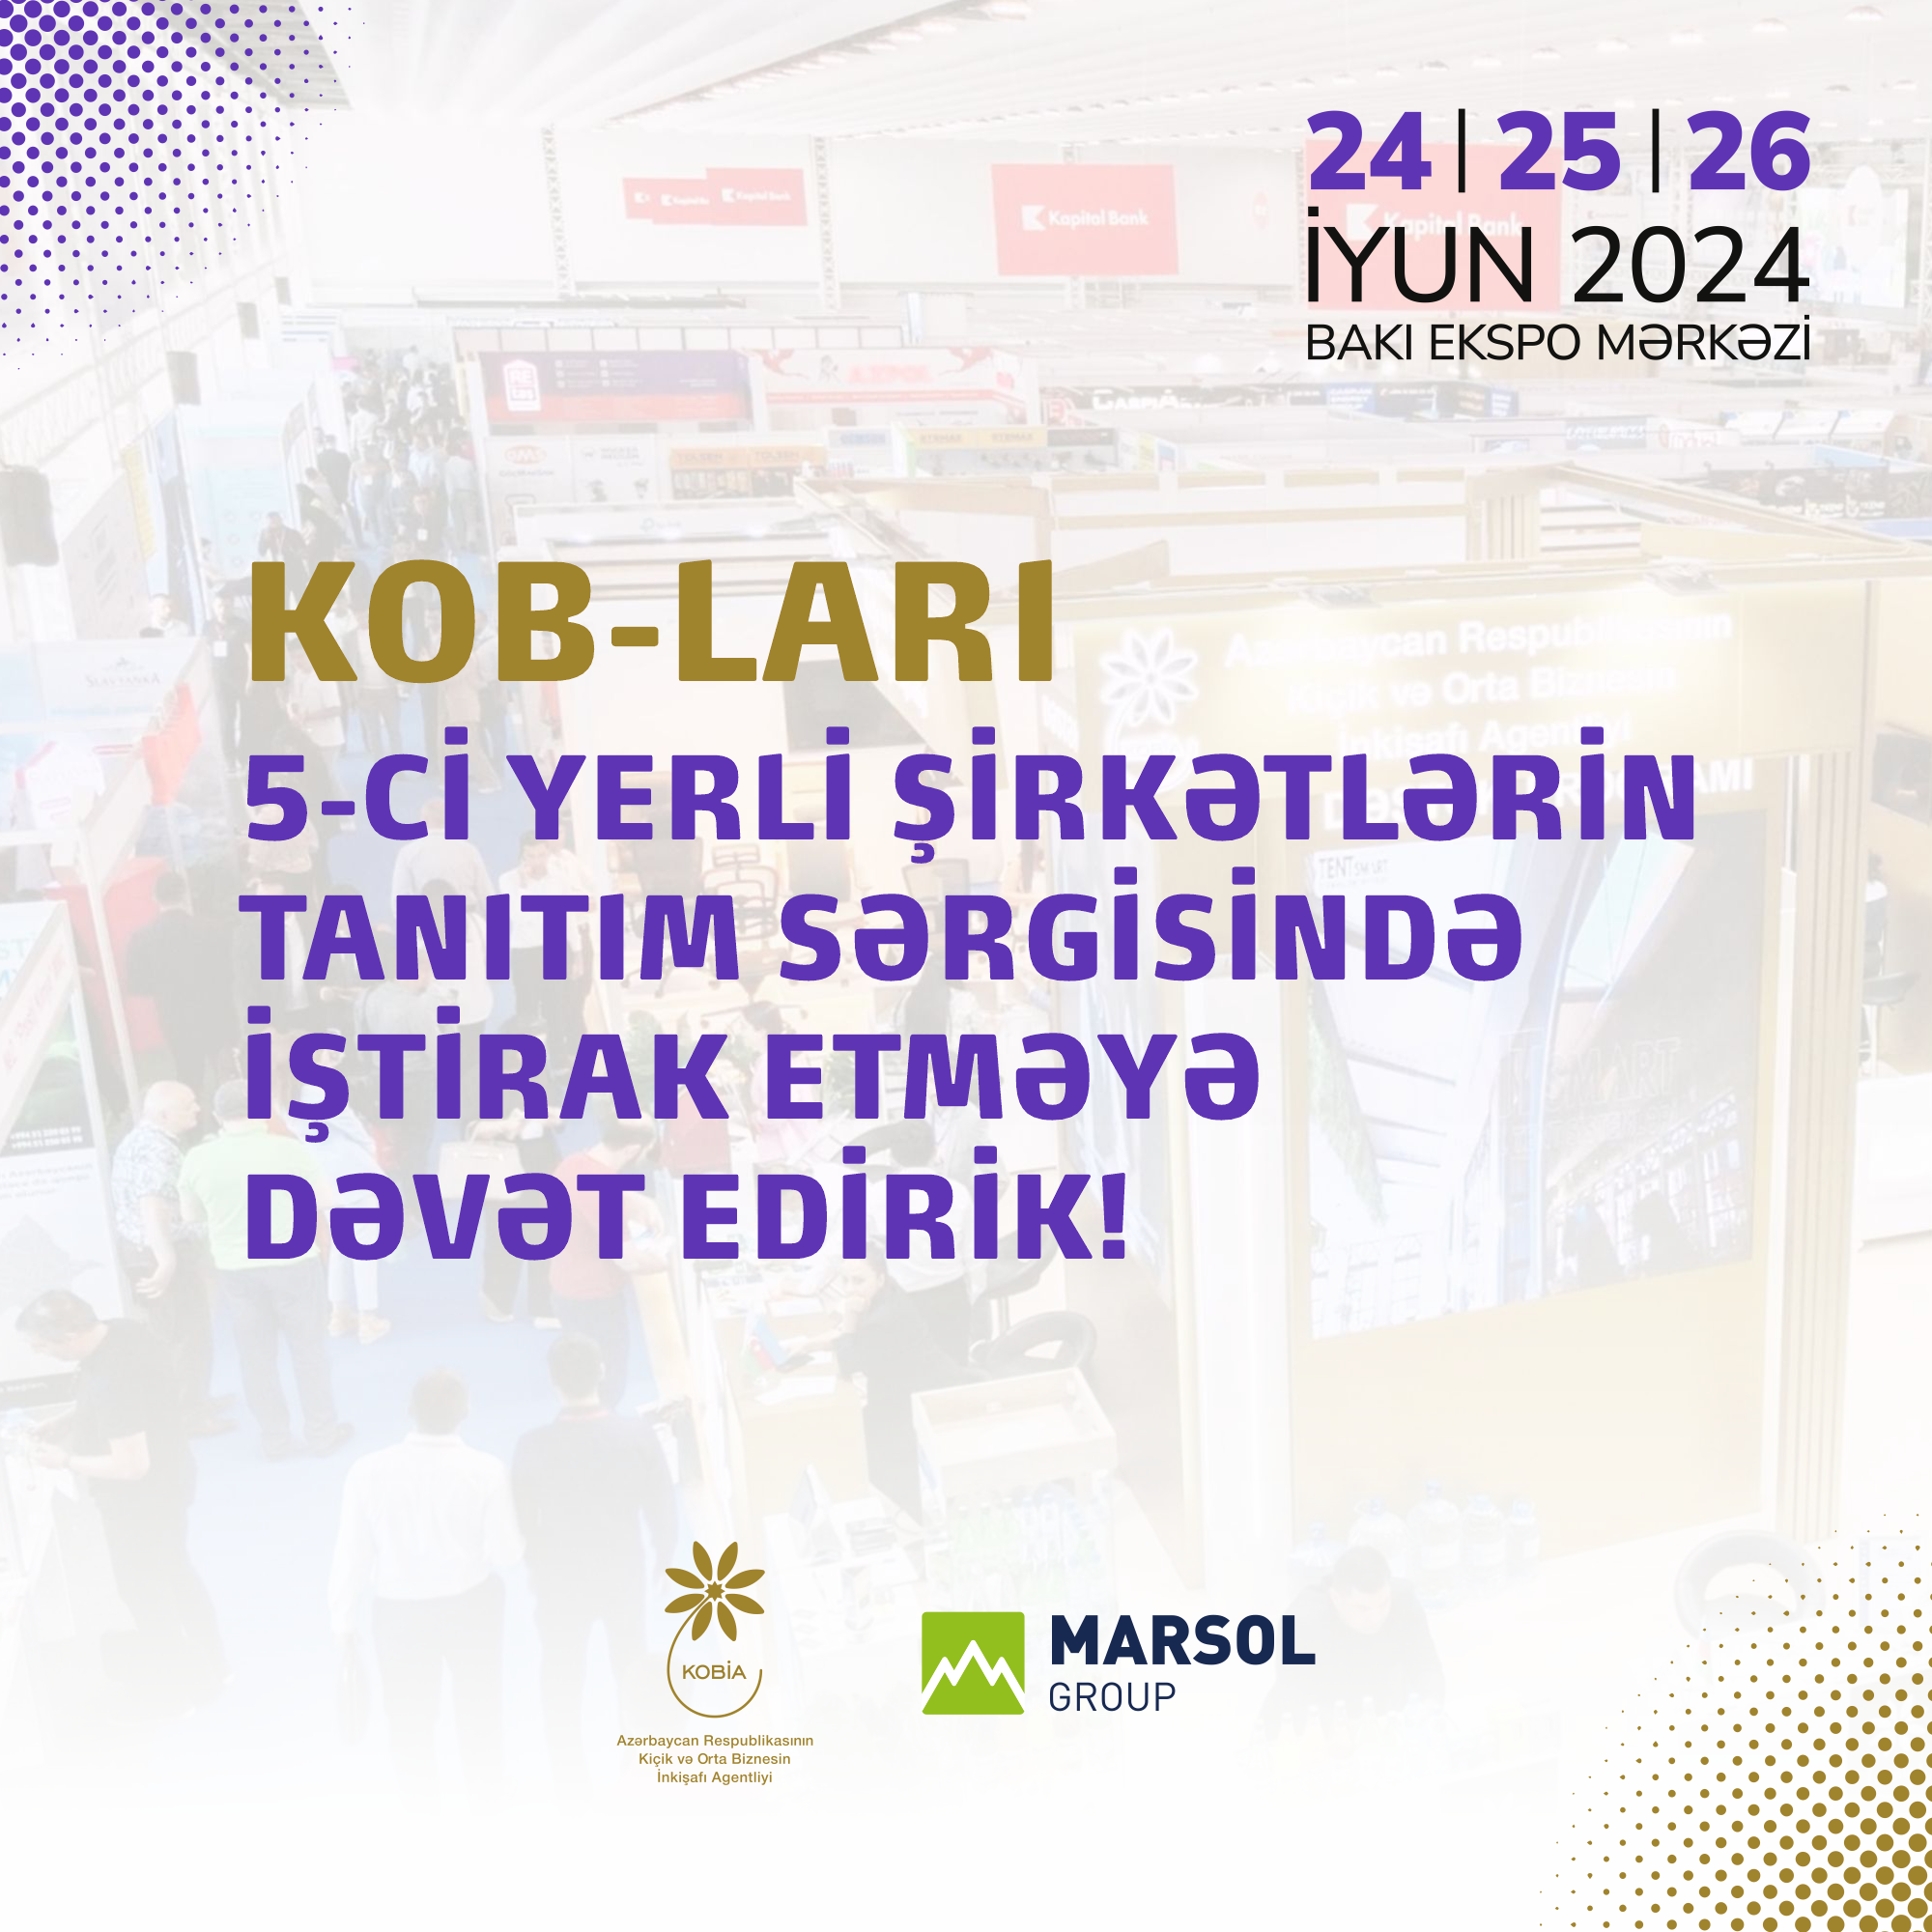 Attention to SMBs intending to present their products and services at the “5th promotional exhibition of local companies!” 